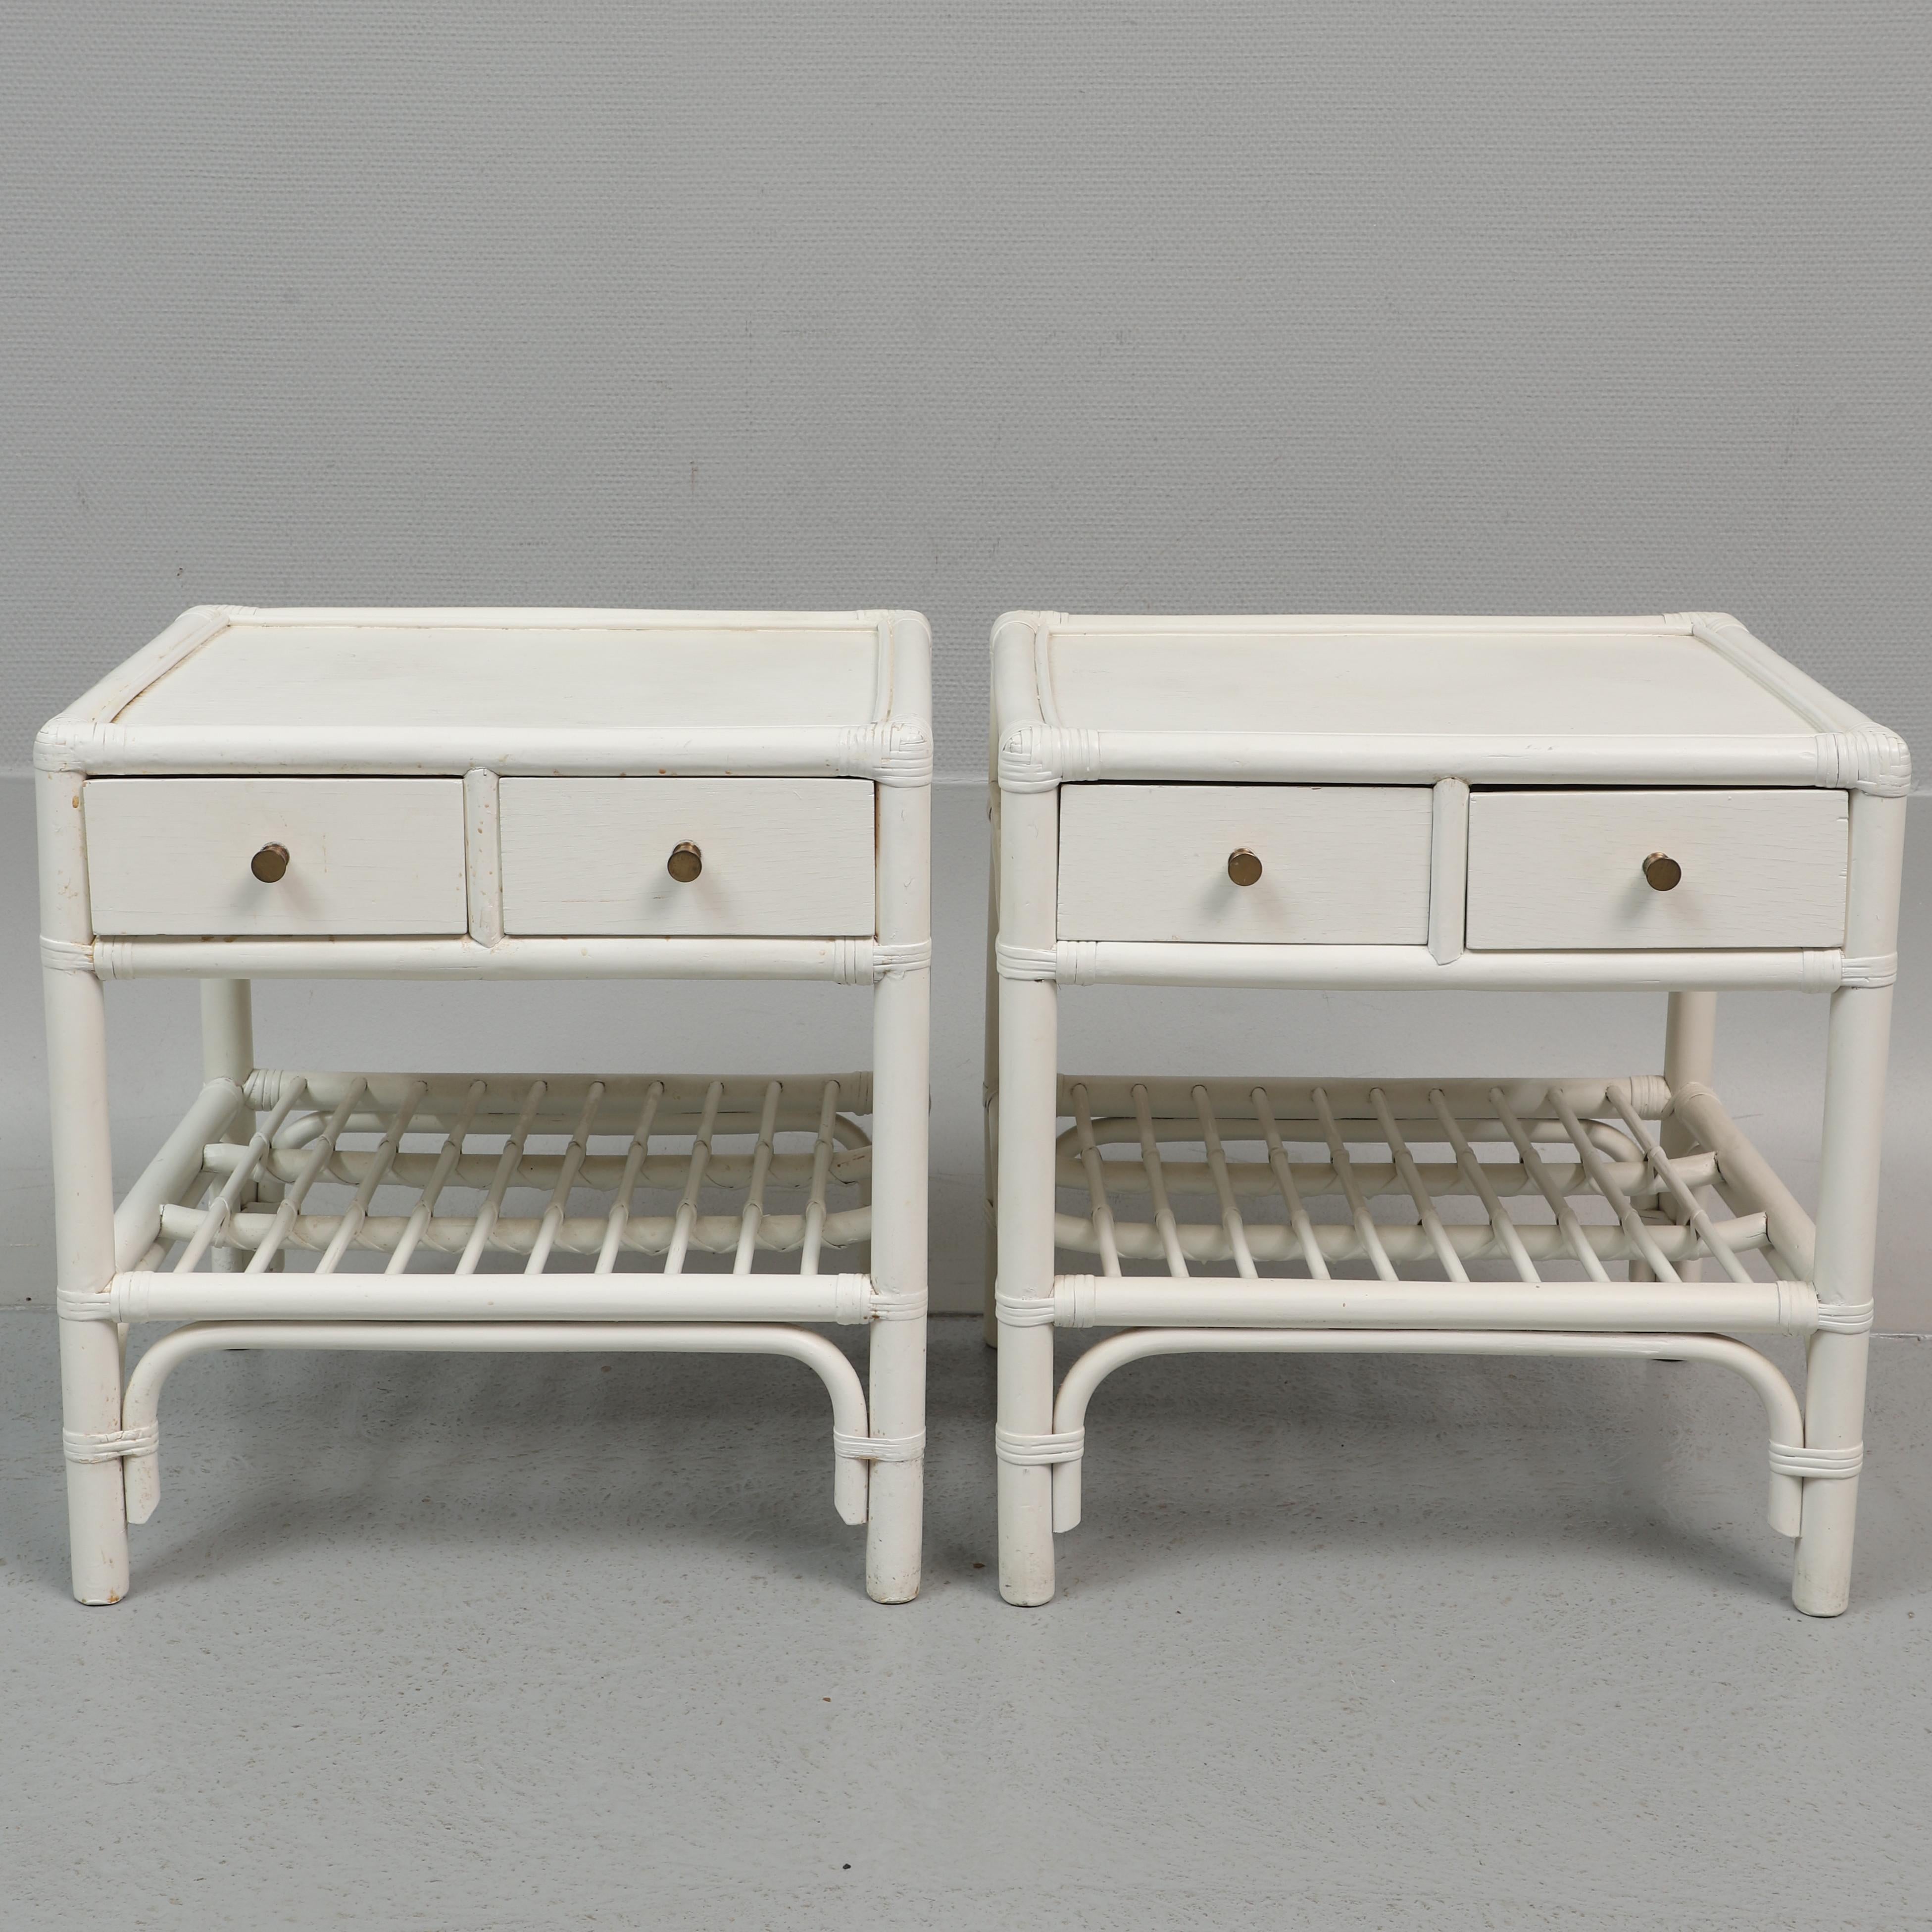 20th Century White Bamboo and Wood Air of Nightstands for DUX Sweden, 1960 For Sale